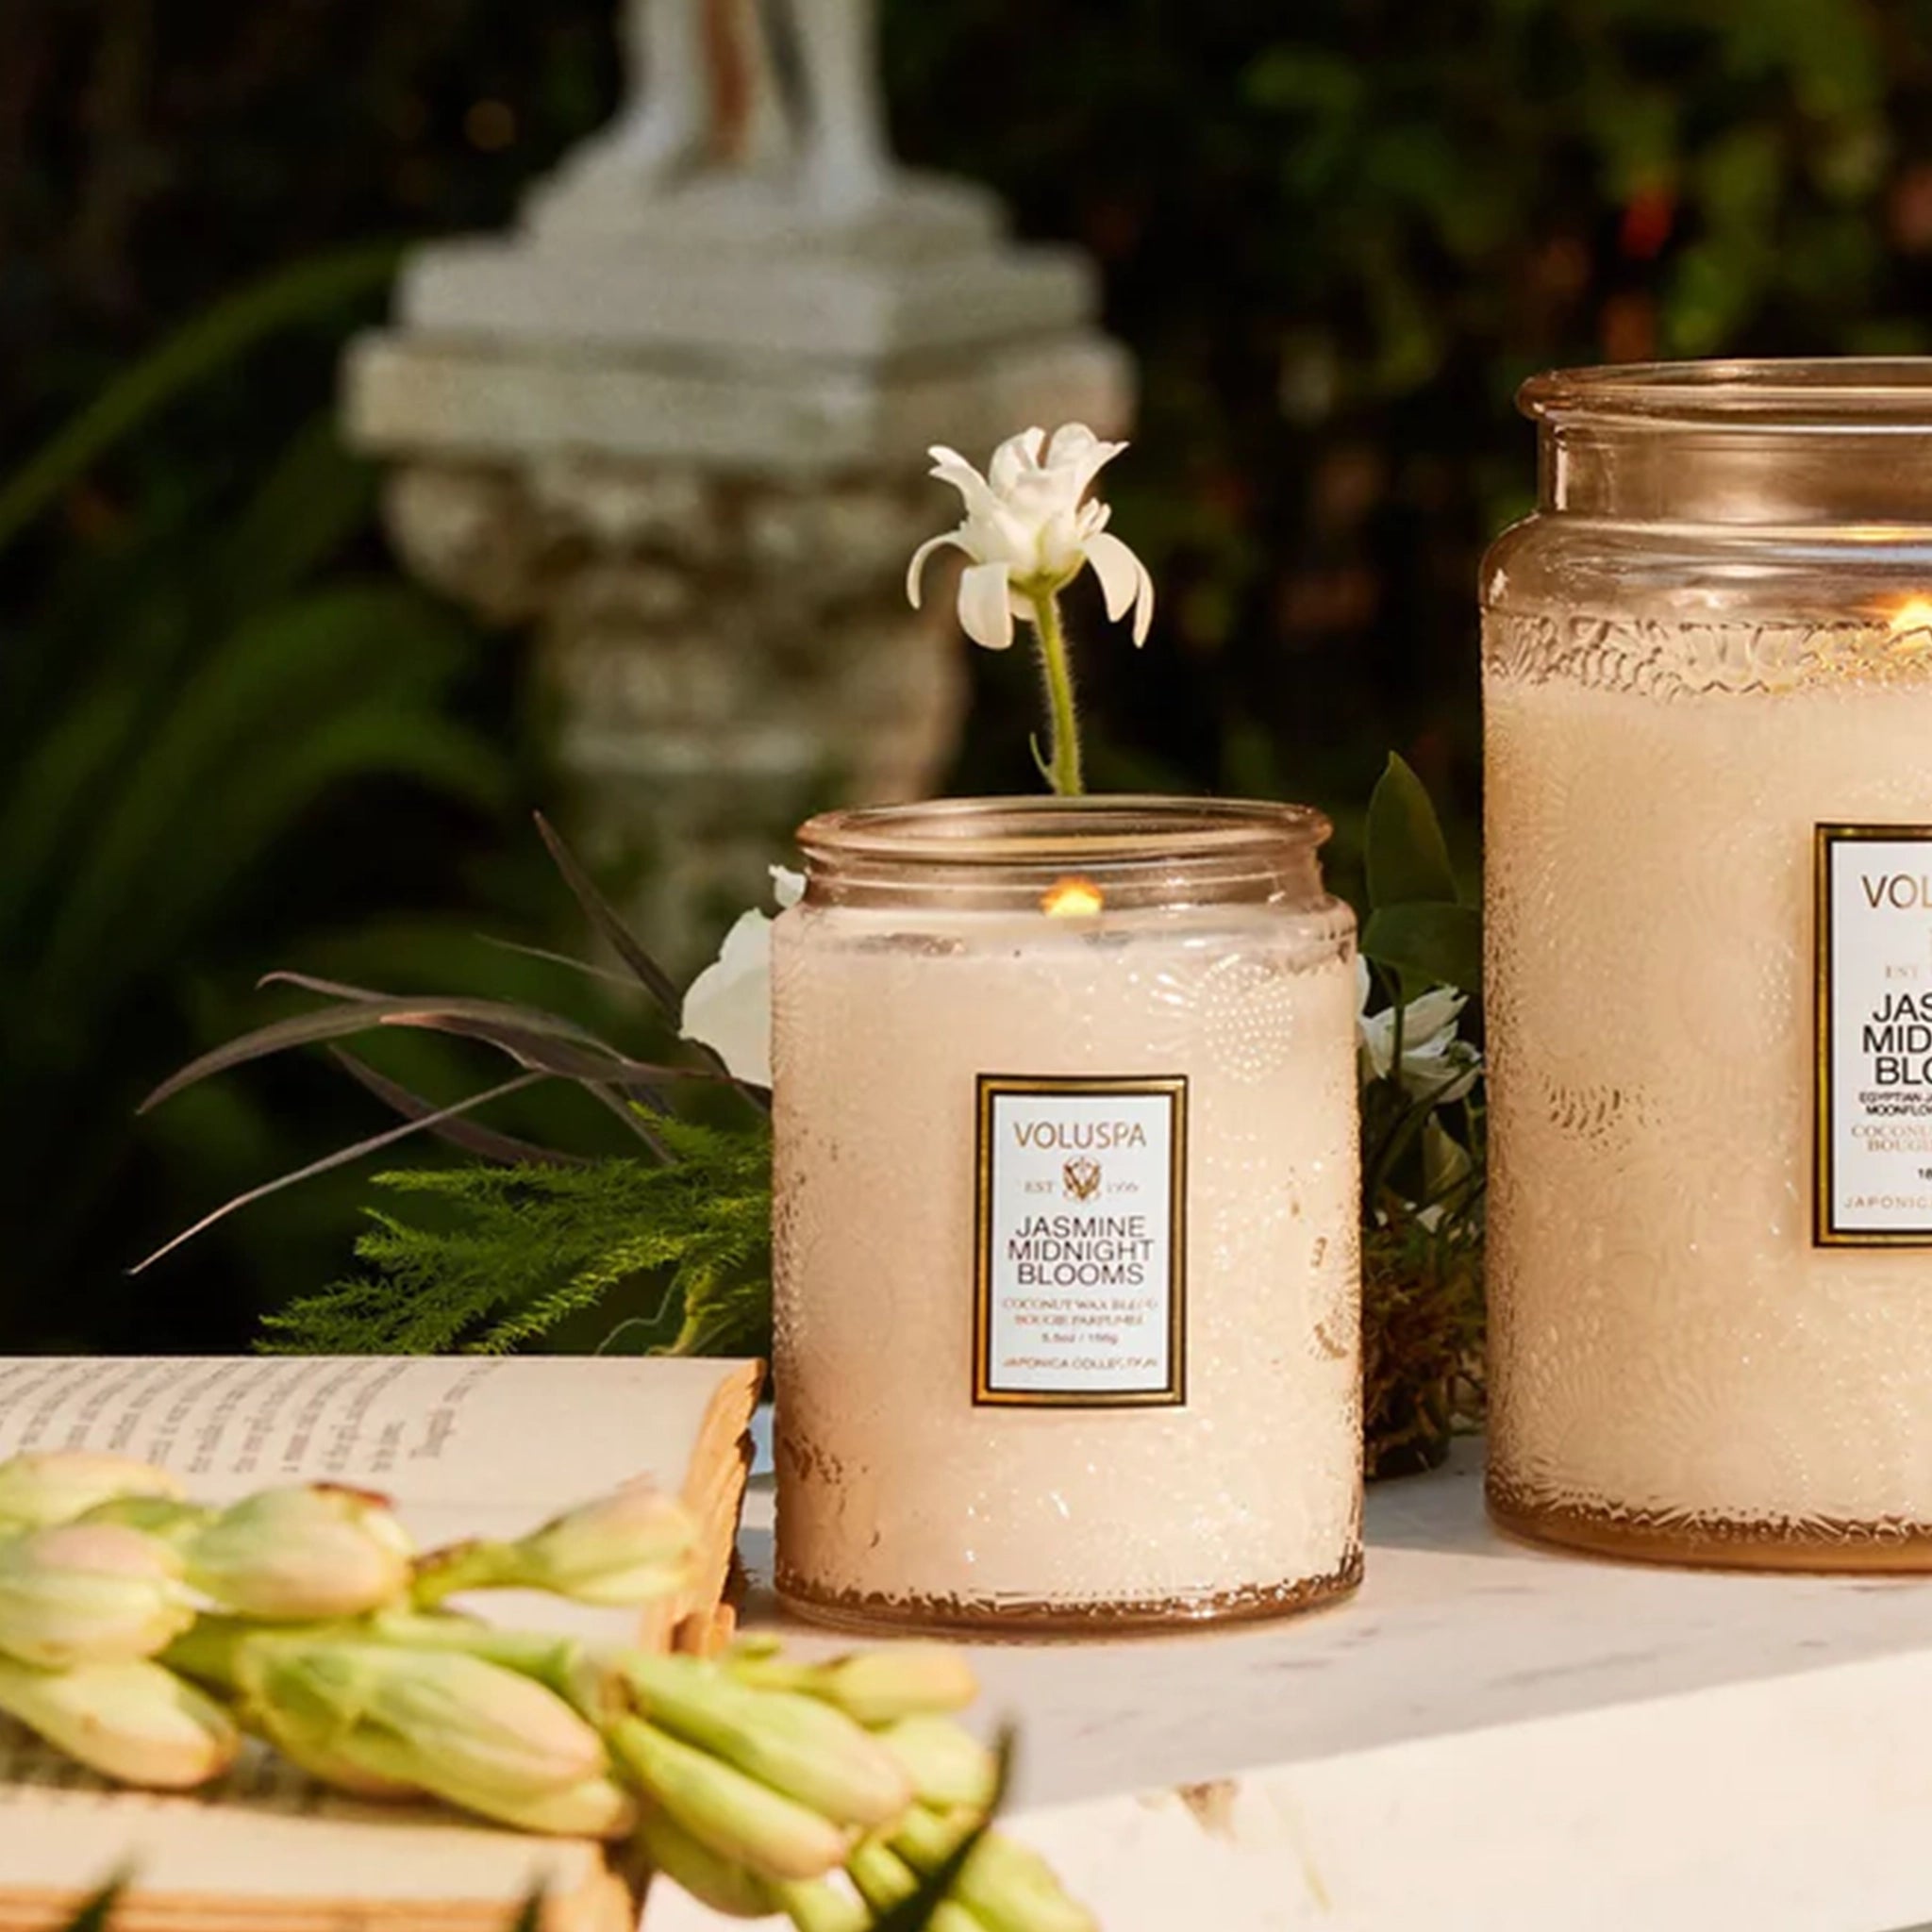 An apricot colored decorative glass jar candle with an etched floral pattern in the glass and a white rectangular label in the center that reads, "Jasmine Midnight Blooms".